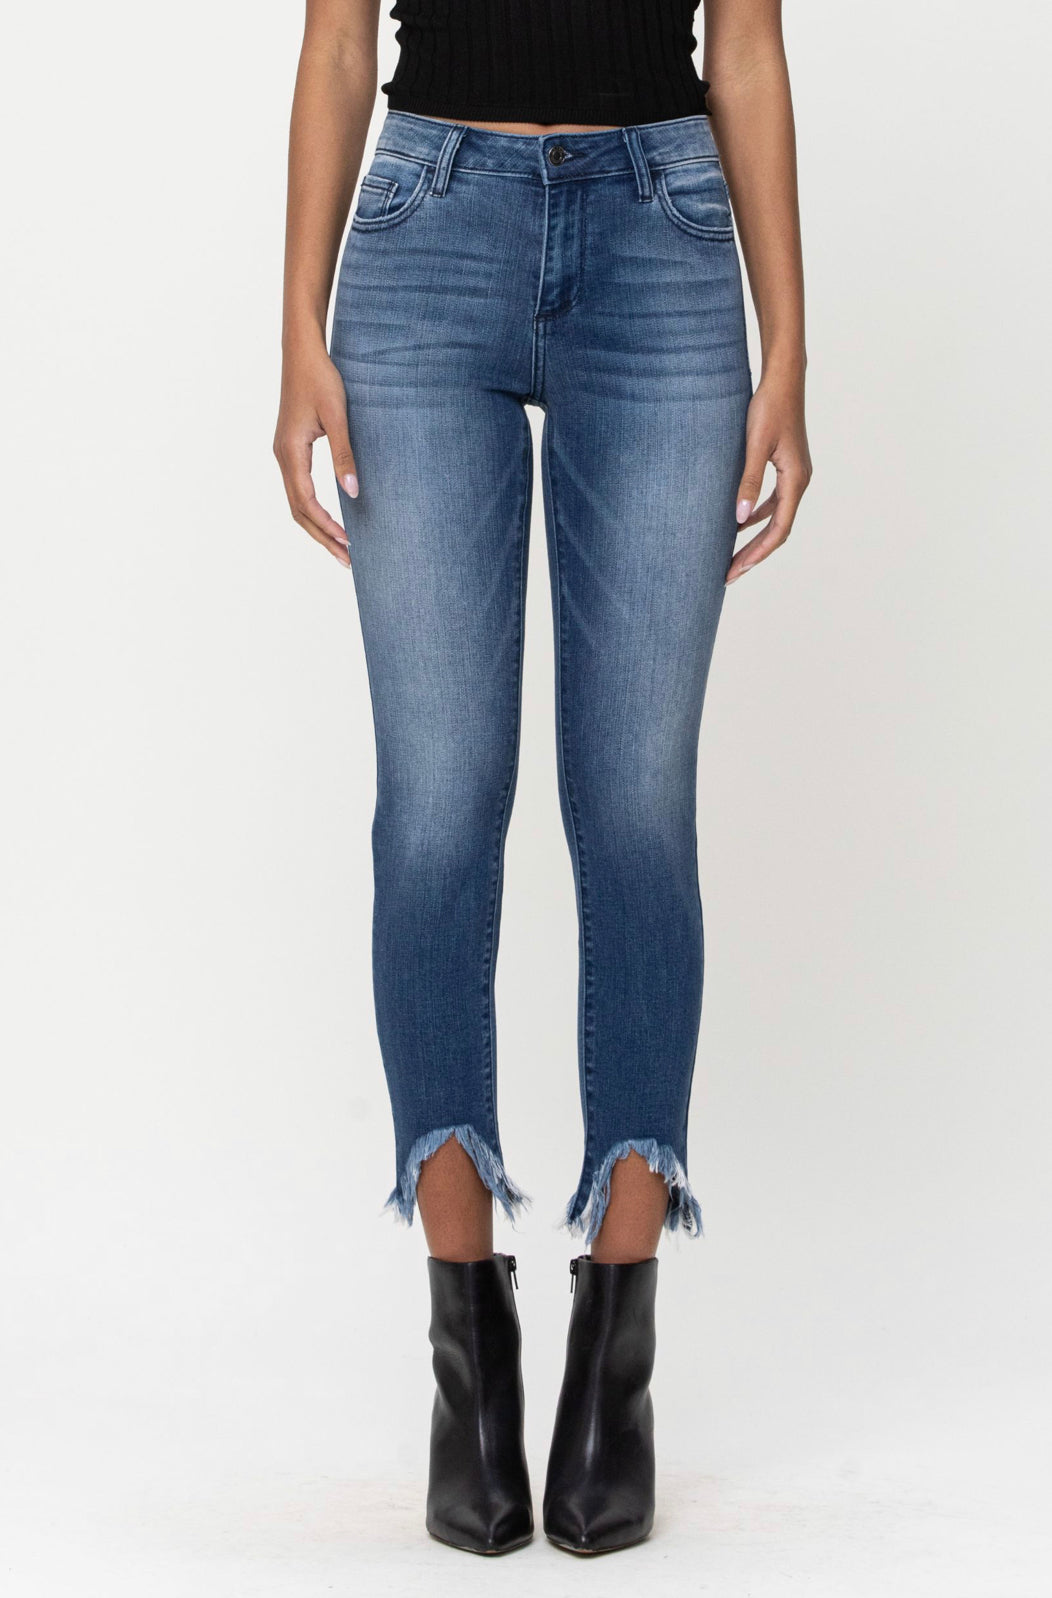 Cello Carrie Mid-Rise Frayed Hem Jeans